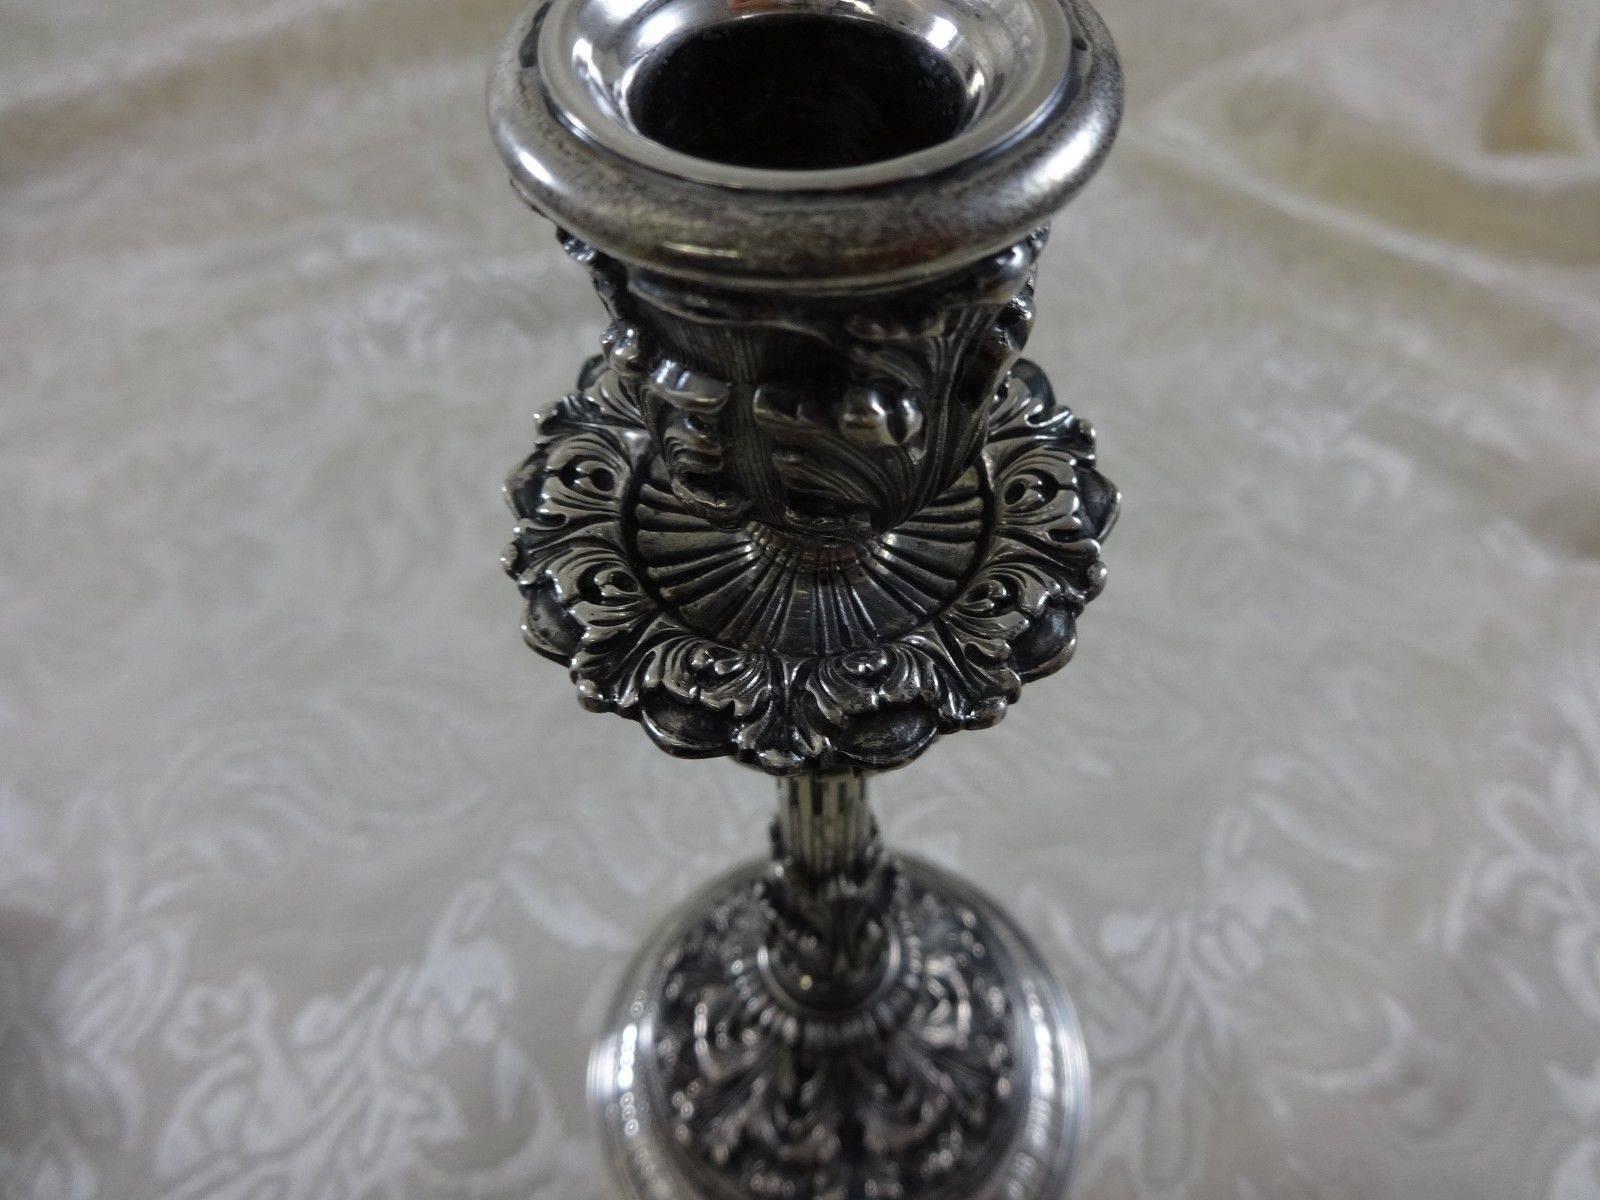 Grande Imperiale by Buccellati
Italy - Italian.

Grande Imperiale by Buccellati beautiful vintage sterling silver pair of hand chased candlesticks with fabulous detail. Height is 9 1/8", weight 20 troy ounces each, (total 40 ozt). Excellent